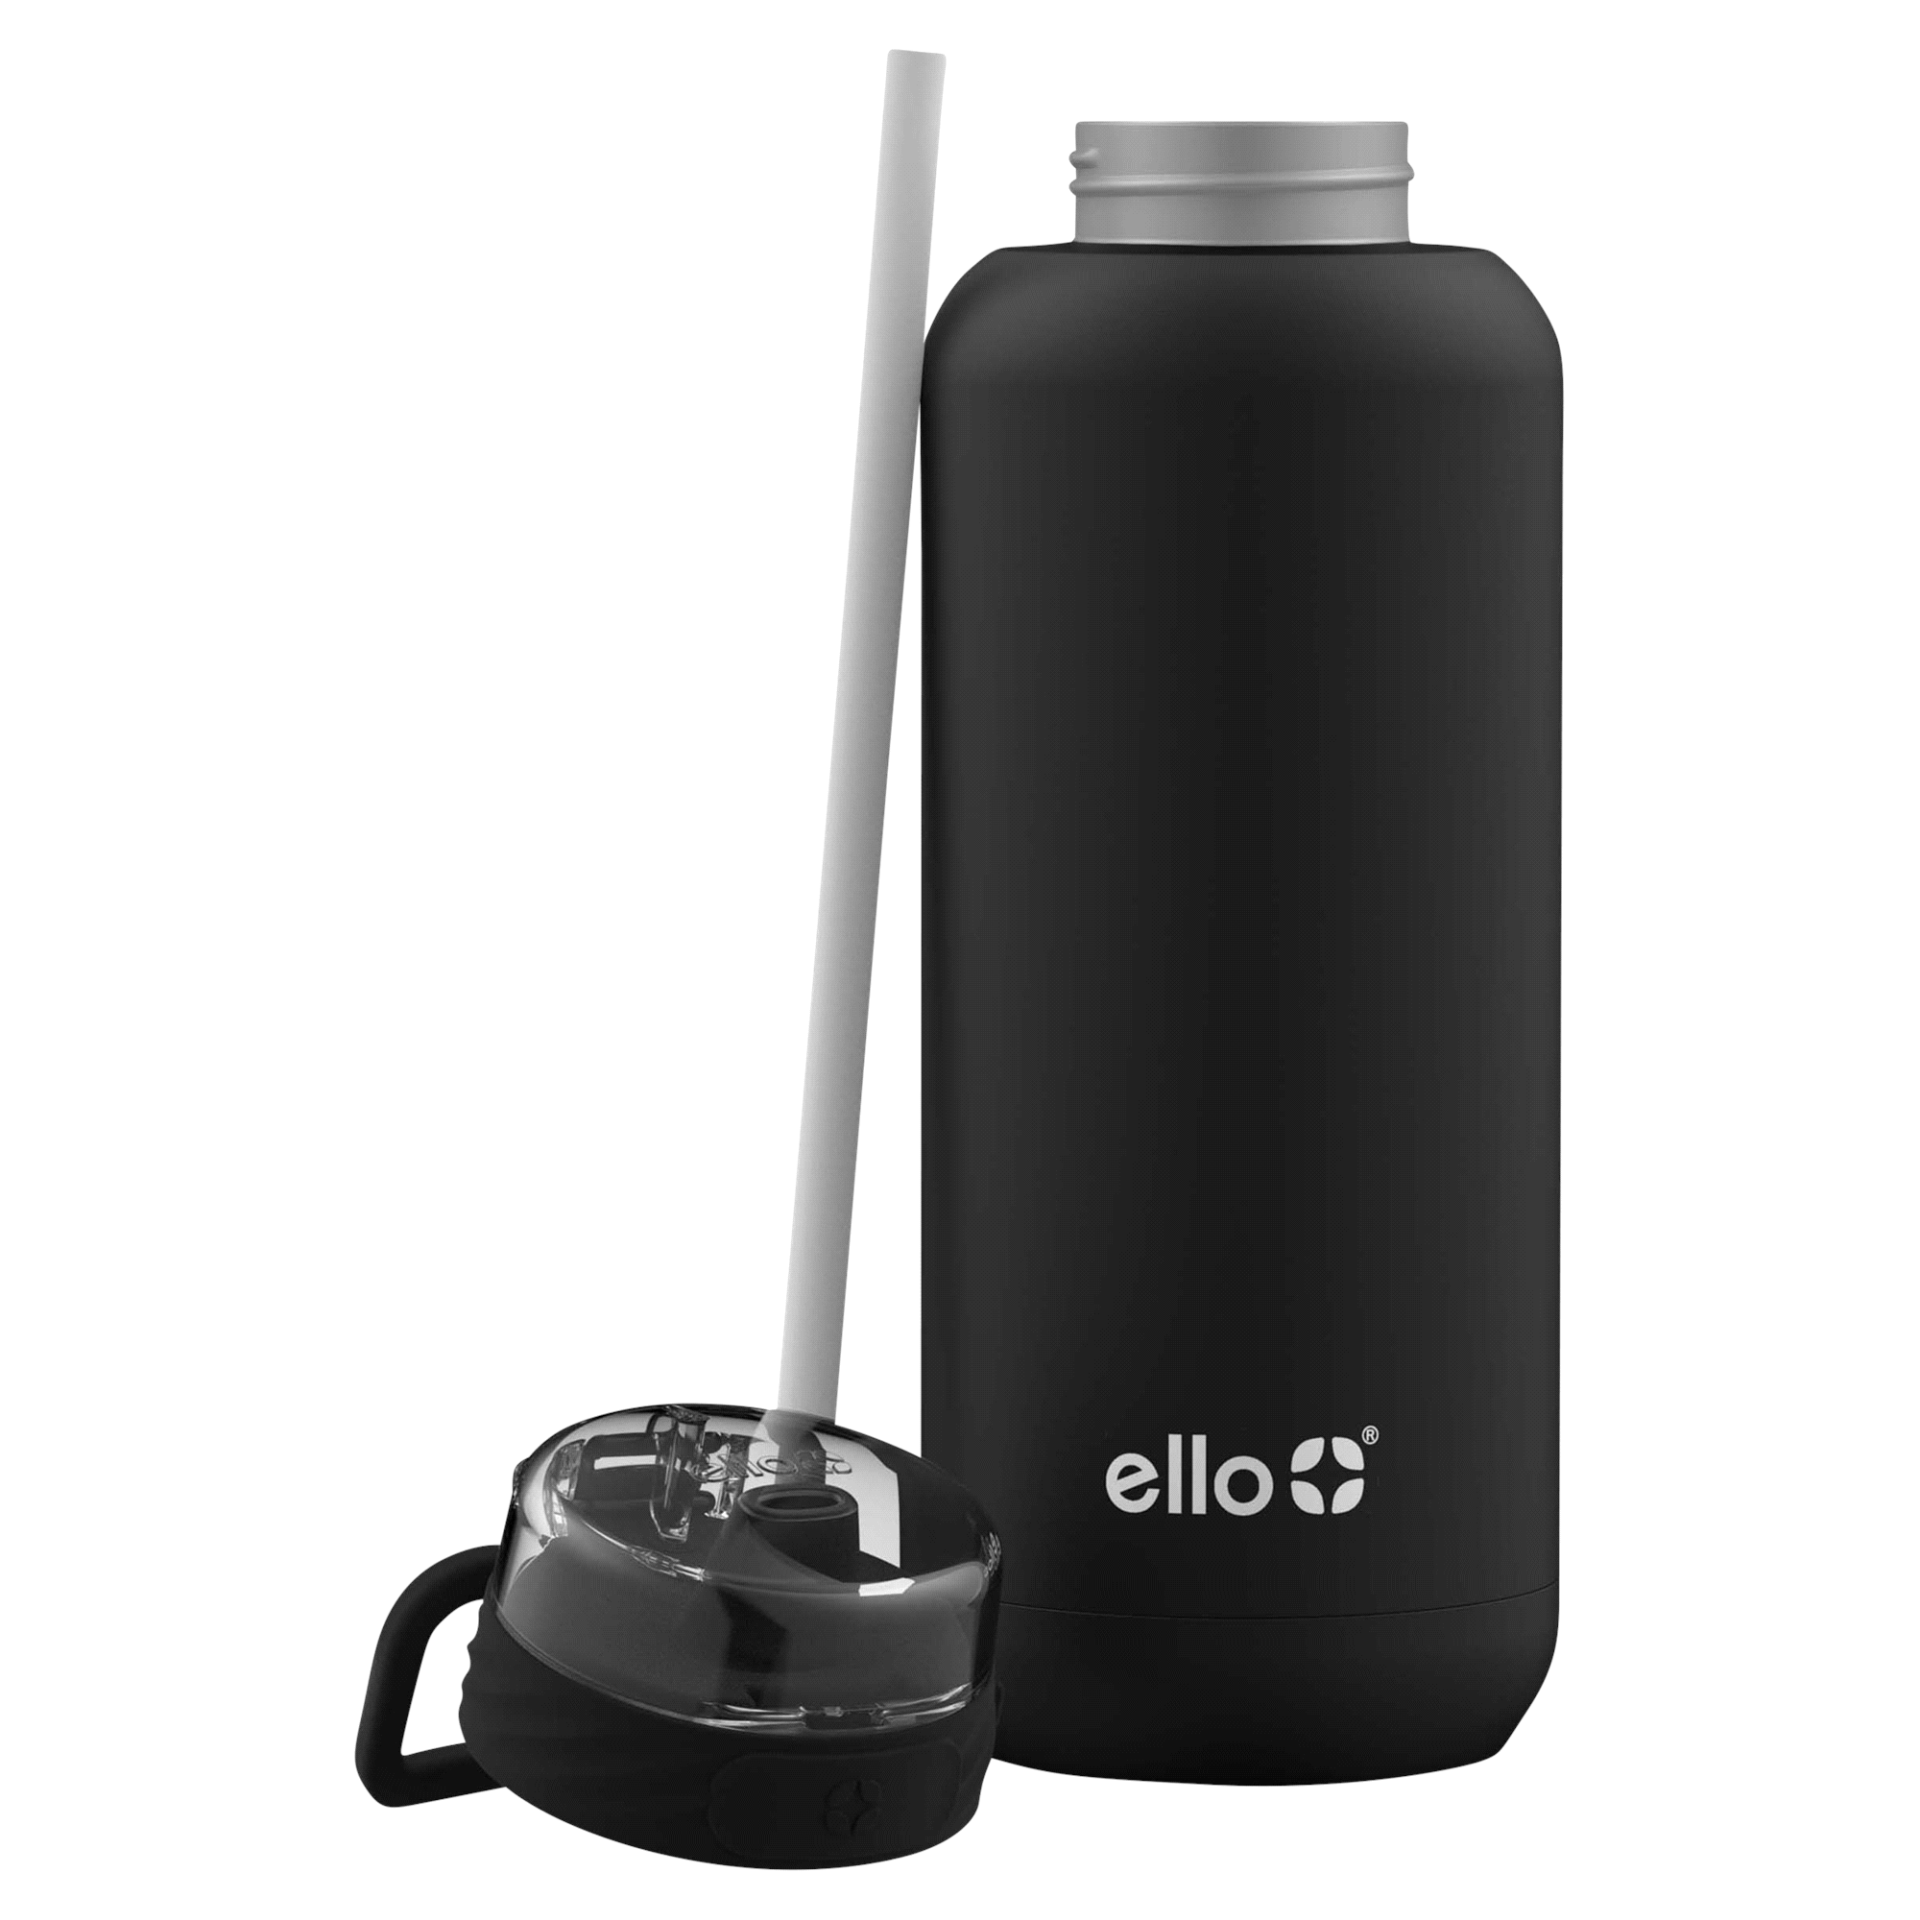 Ello Cooper XL Stainless Steel Water Bottle - Yucca - 32-Ounce - Each